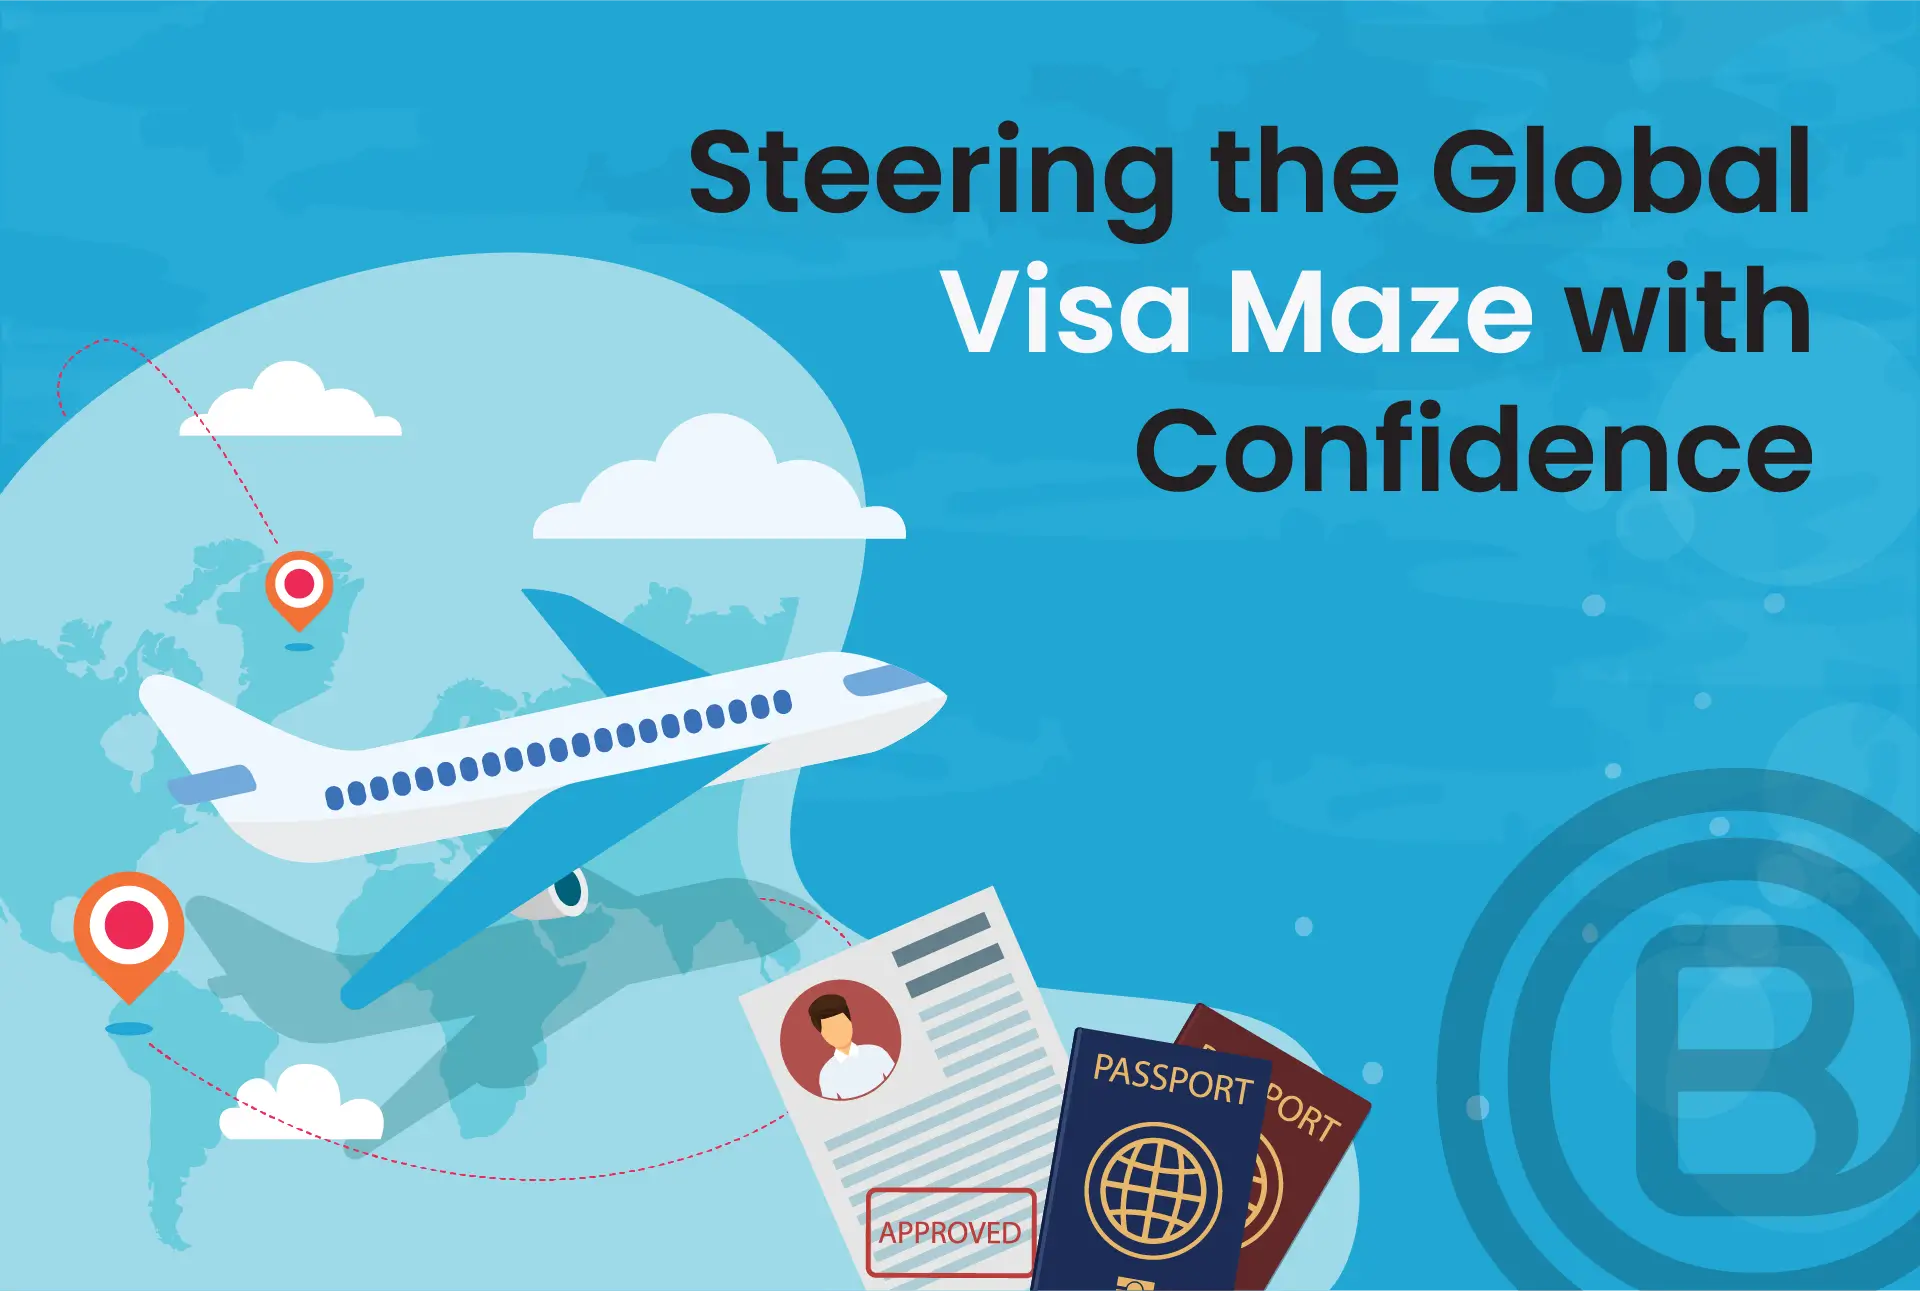 Steering the Global Visa Maze with Confidence